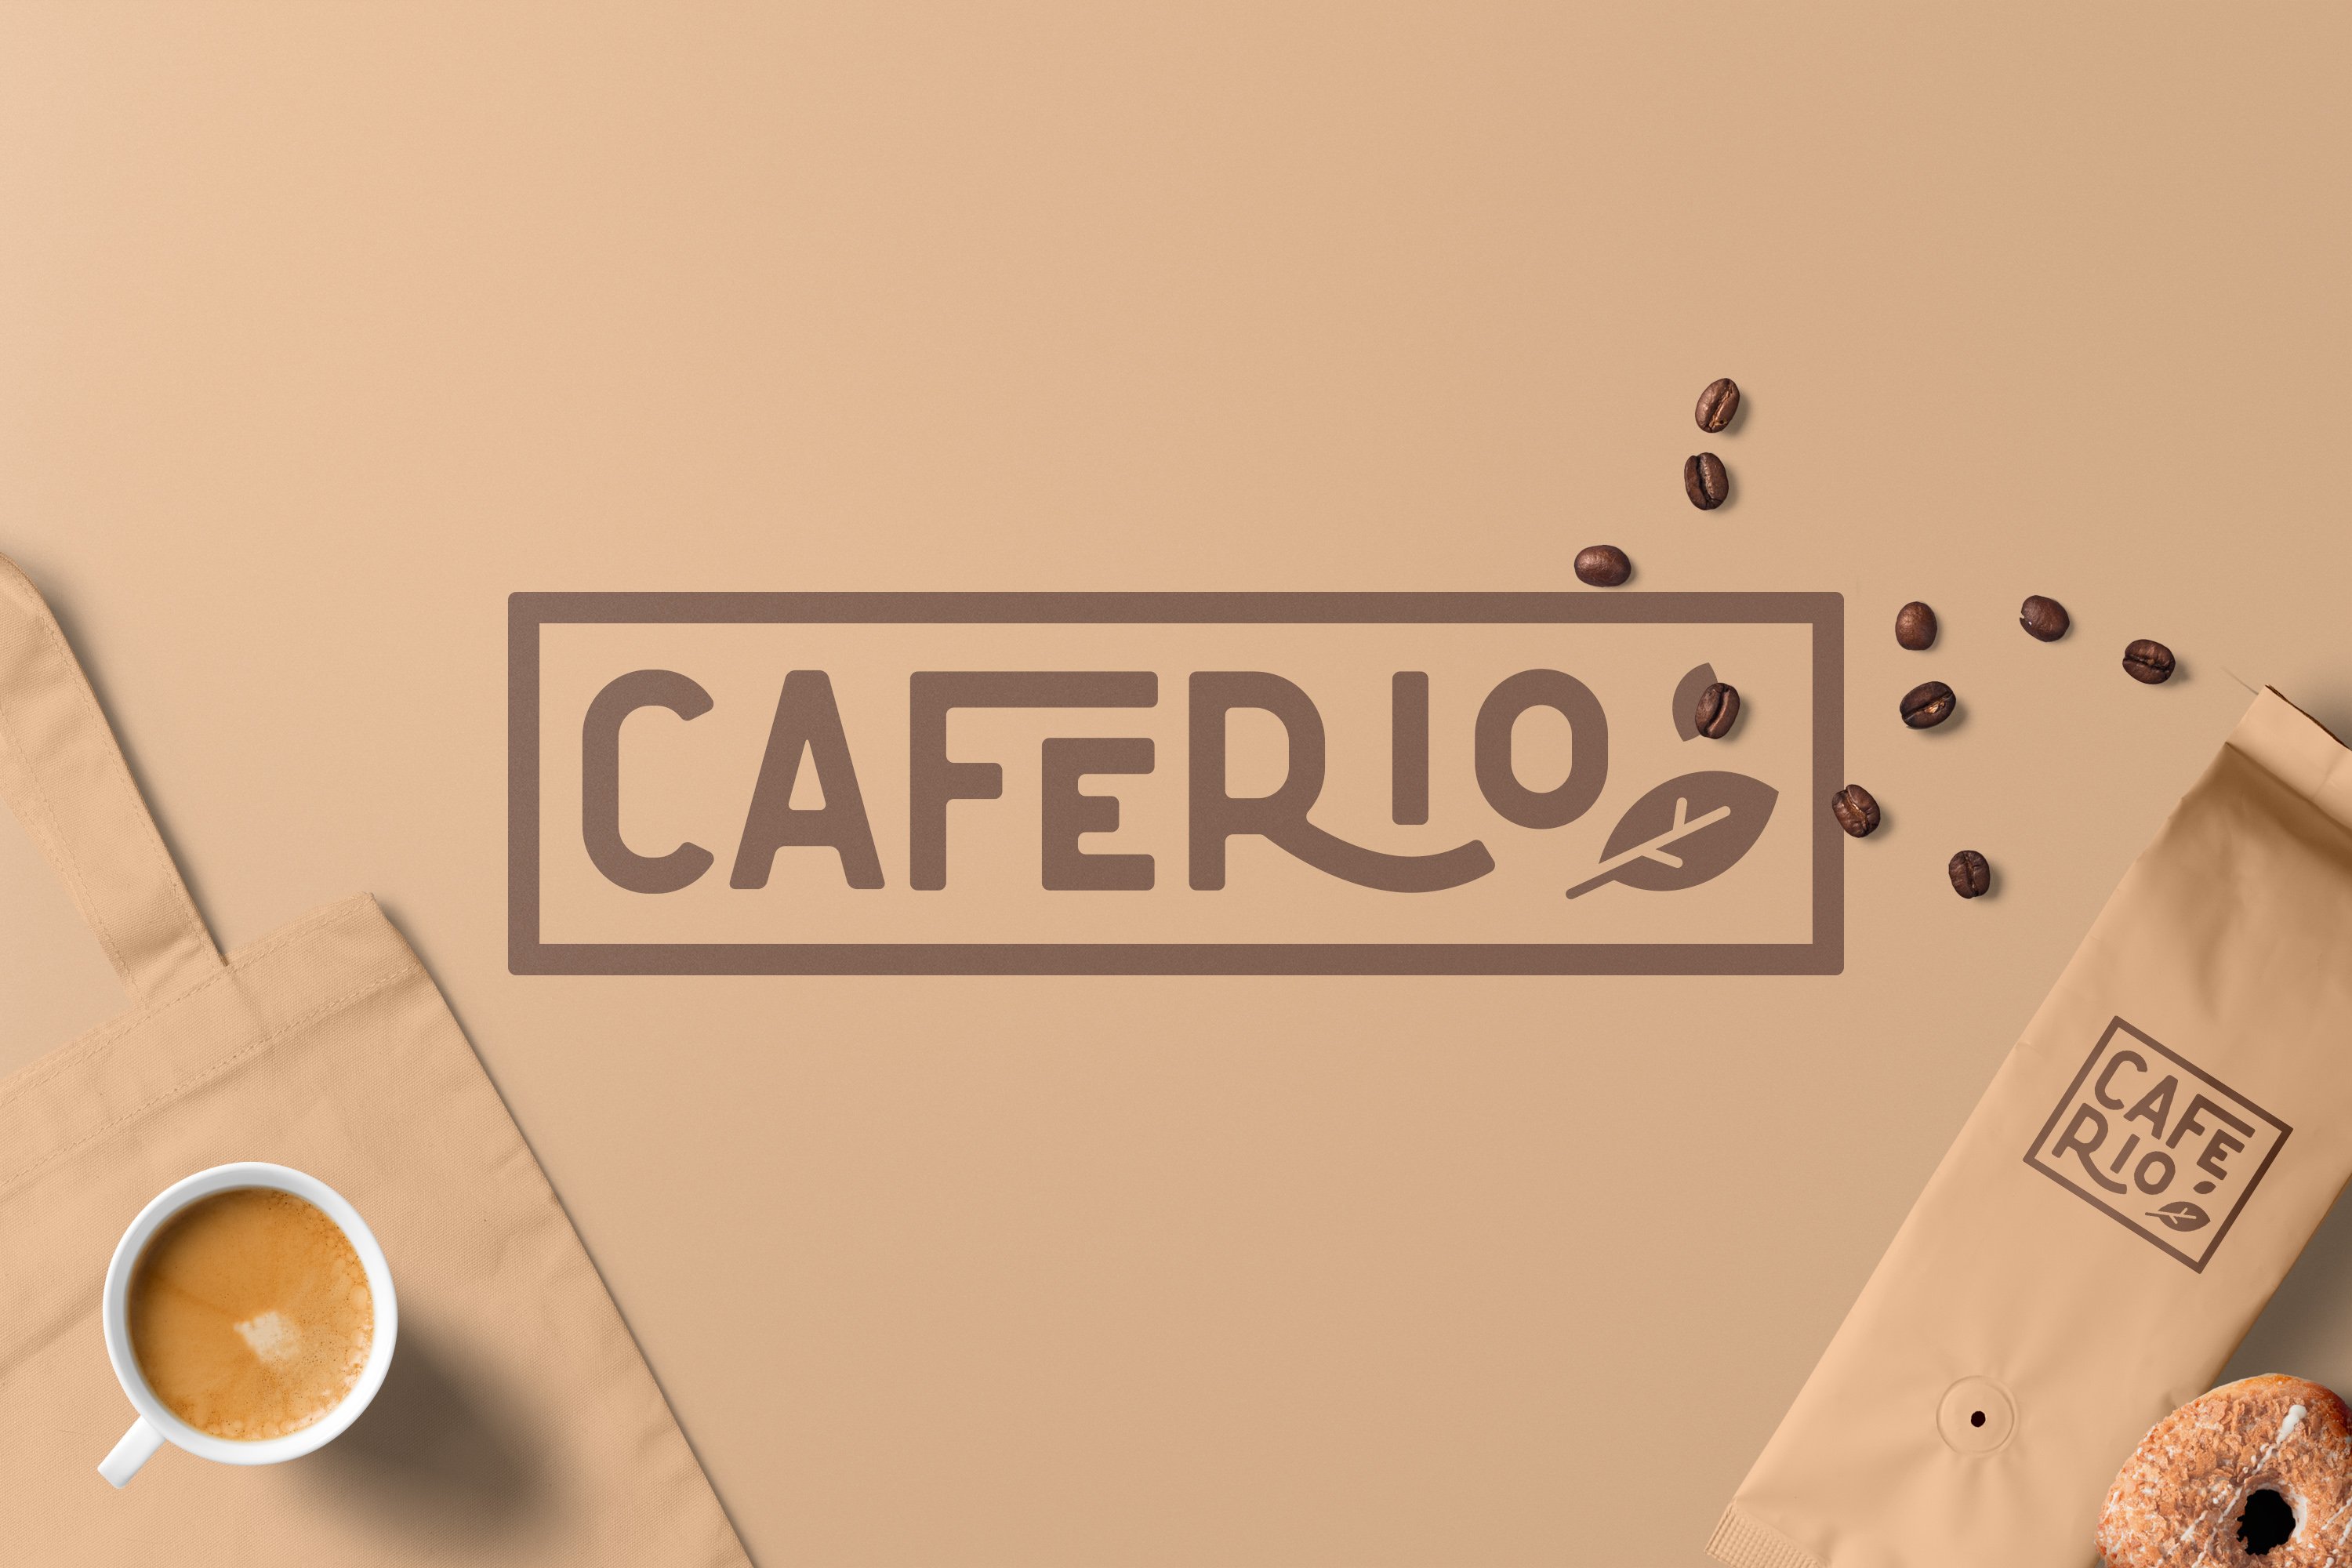 Caferio - The Florest Typeface cover image.